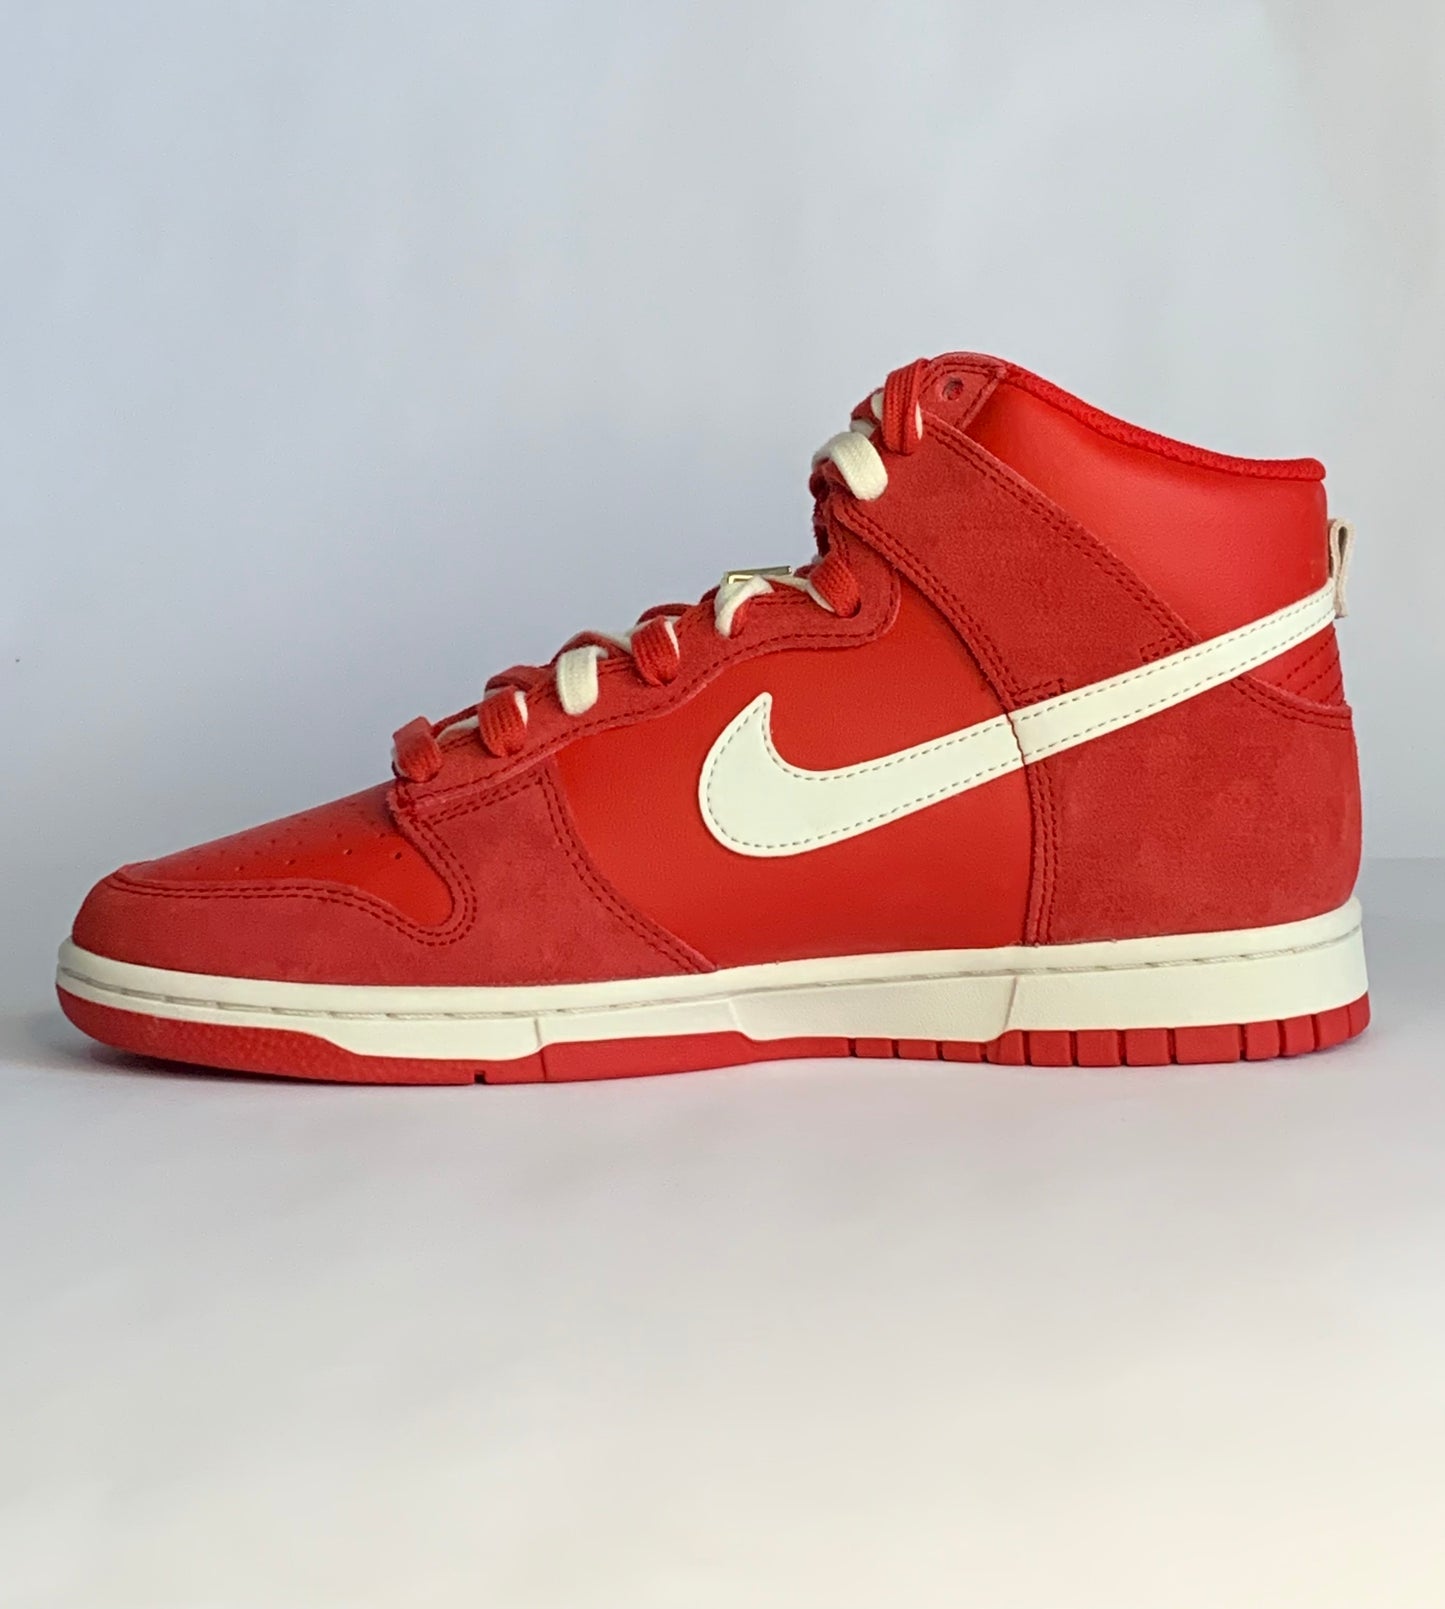 Dunk High SE ‘First Use Pack- University Red’